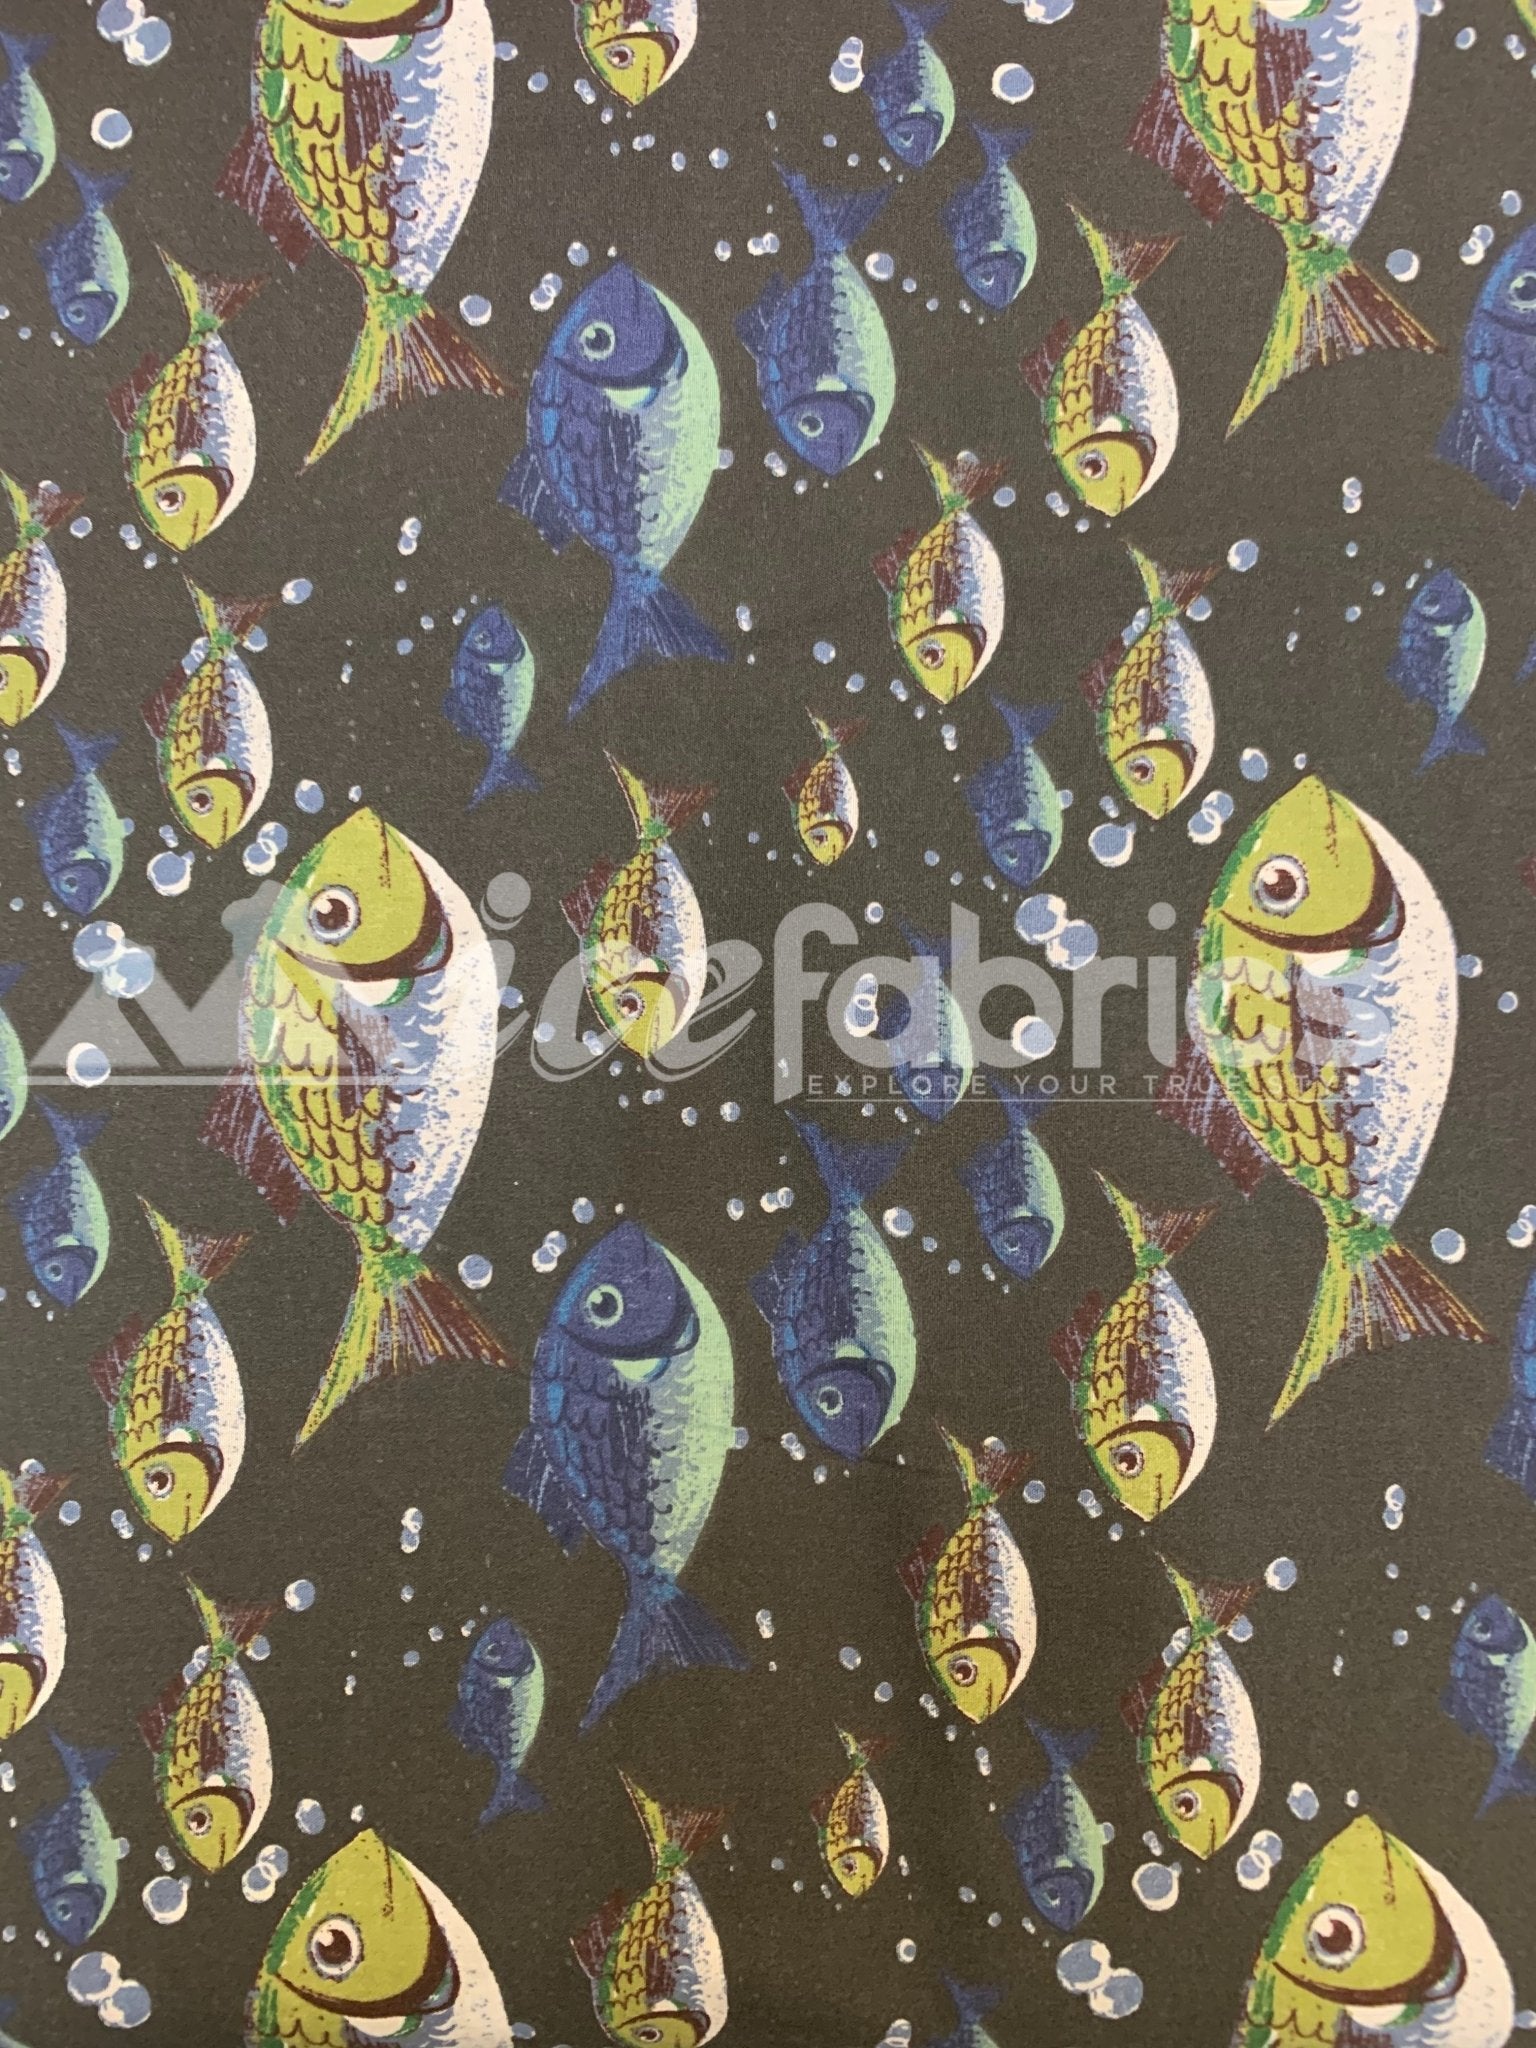 Fashion Fish Print Poly Cotton Fabric By The Yard (Red, Gray, Blue)Cotton FabricICEFABRICICE FABRICSDark GrayFashion Fish Print Poly Cotton Fabric By The Yard (Red, Gray, Blue) ICEFABRIC Dark Gray